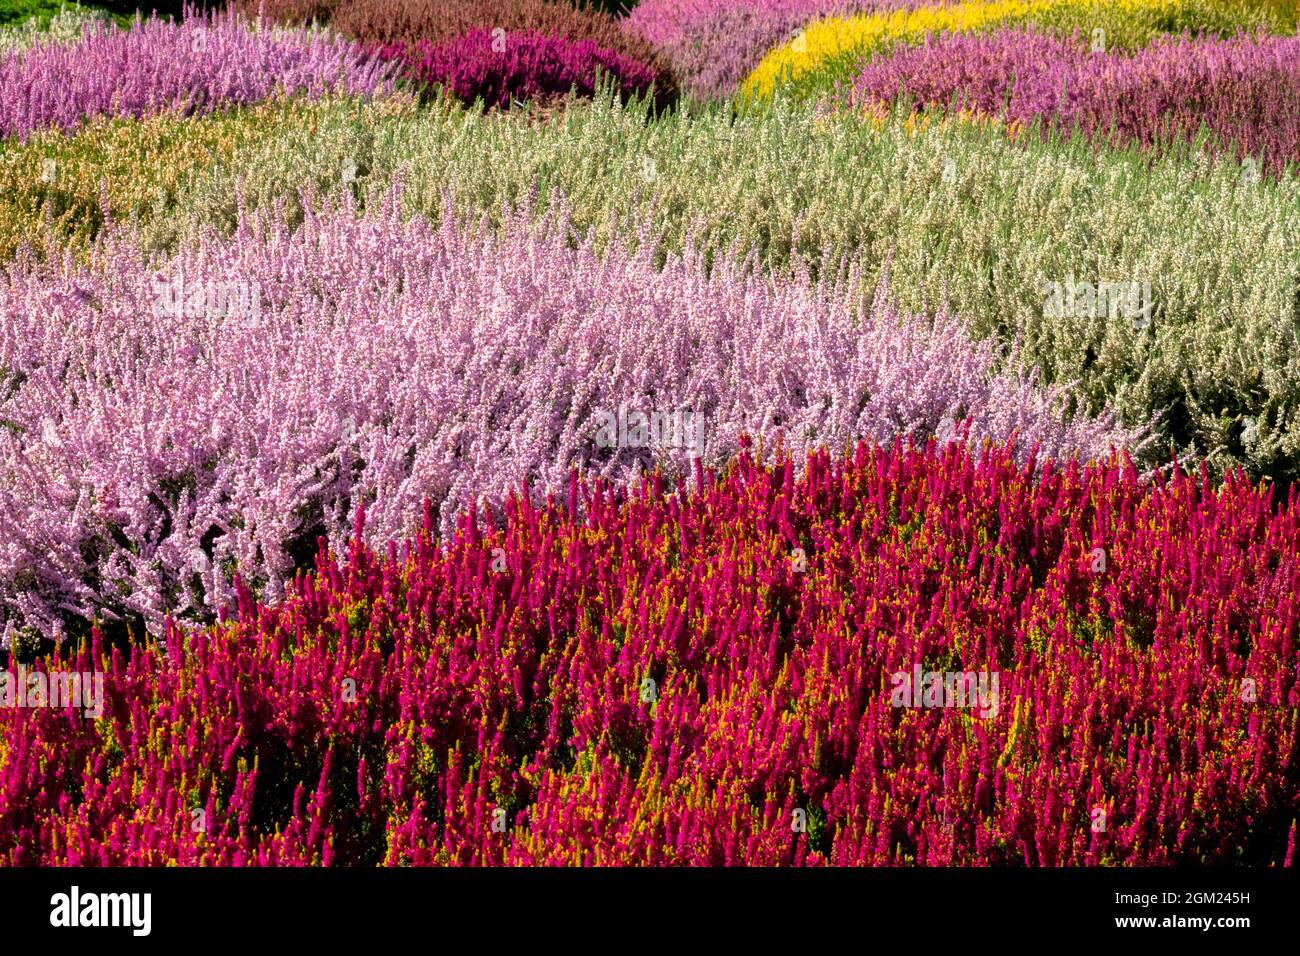 Colorful heather garden in the foreground Red Calluna vulgaris 'Yellow Beauty' Stock Photo